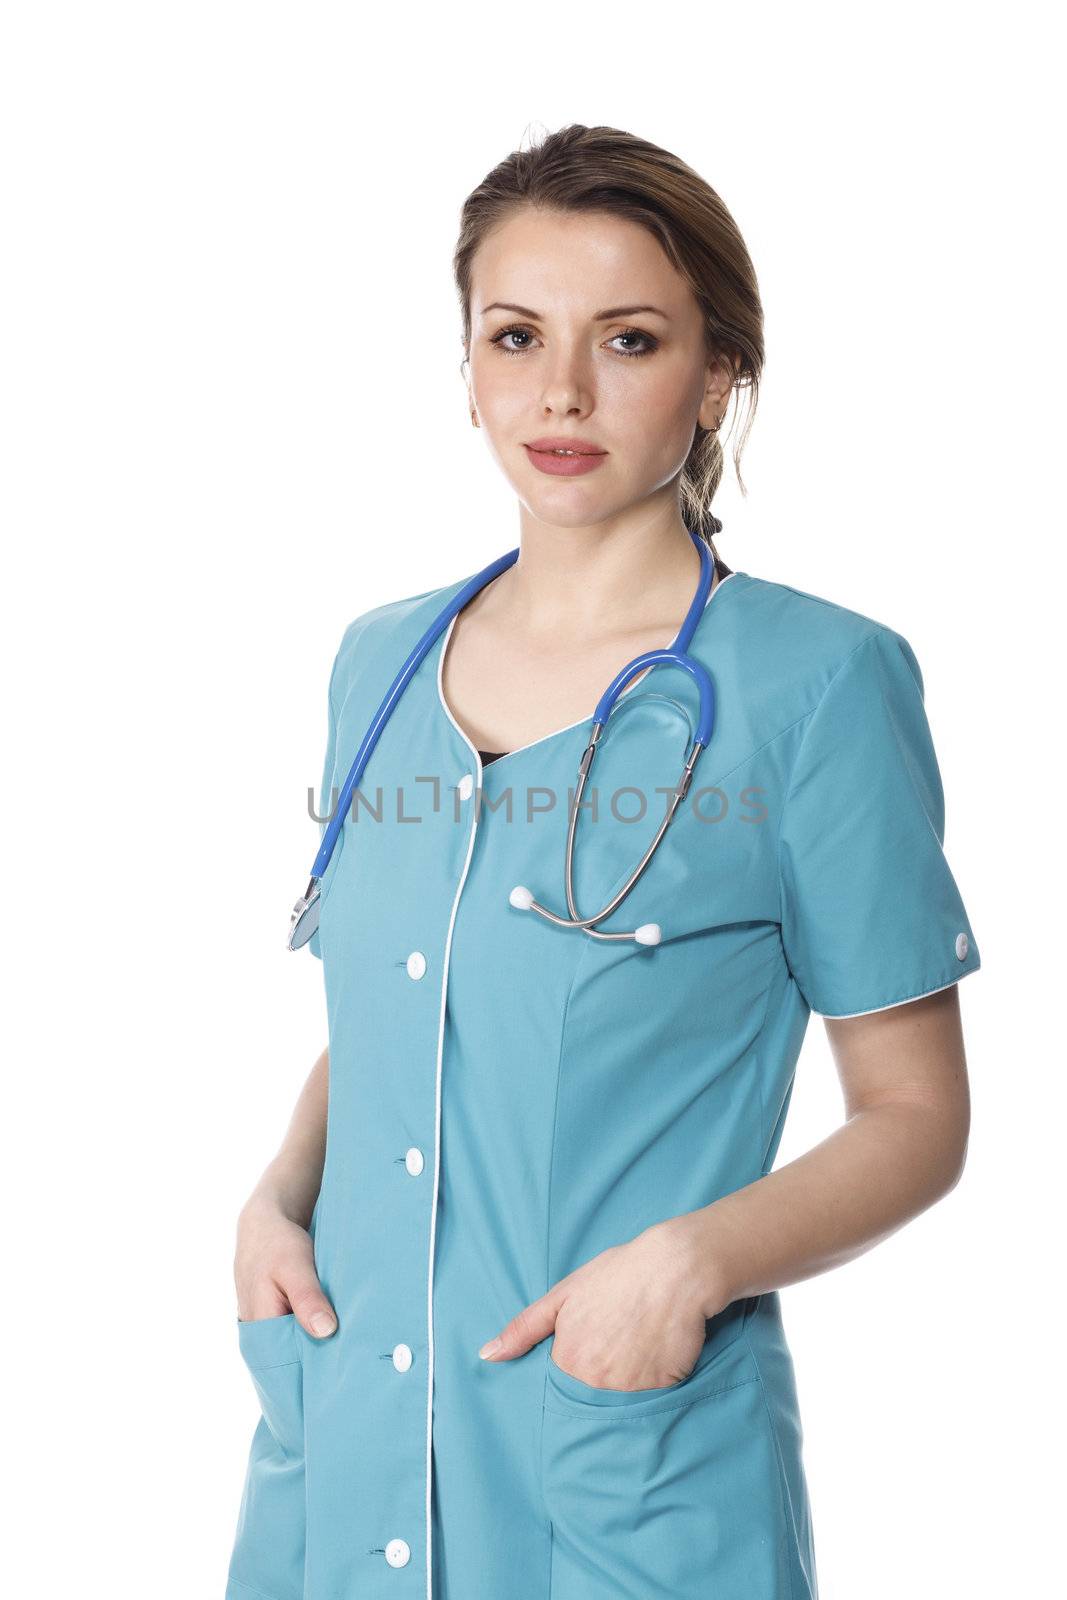 Woman doctor posing against white background by Nobilior